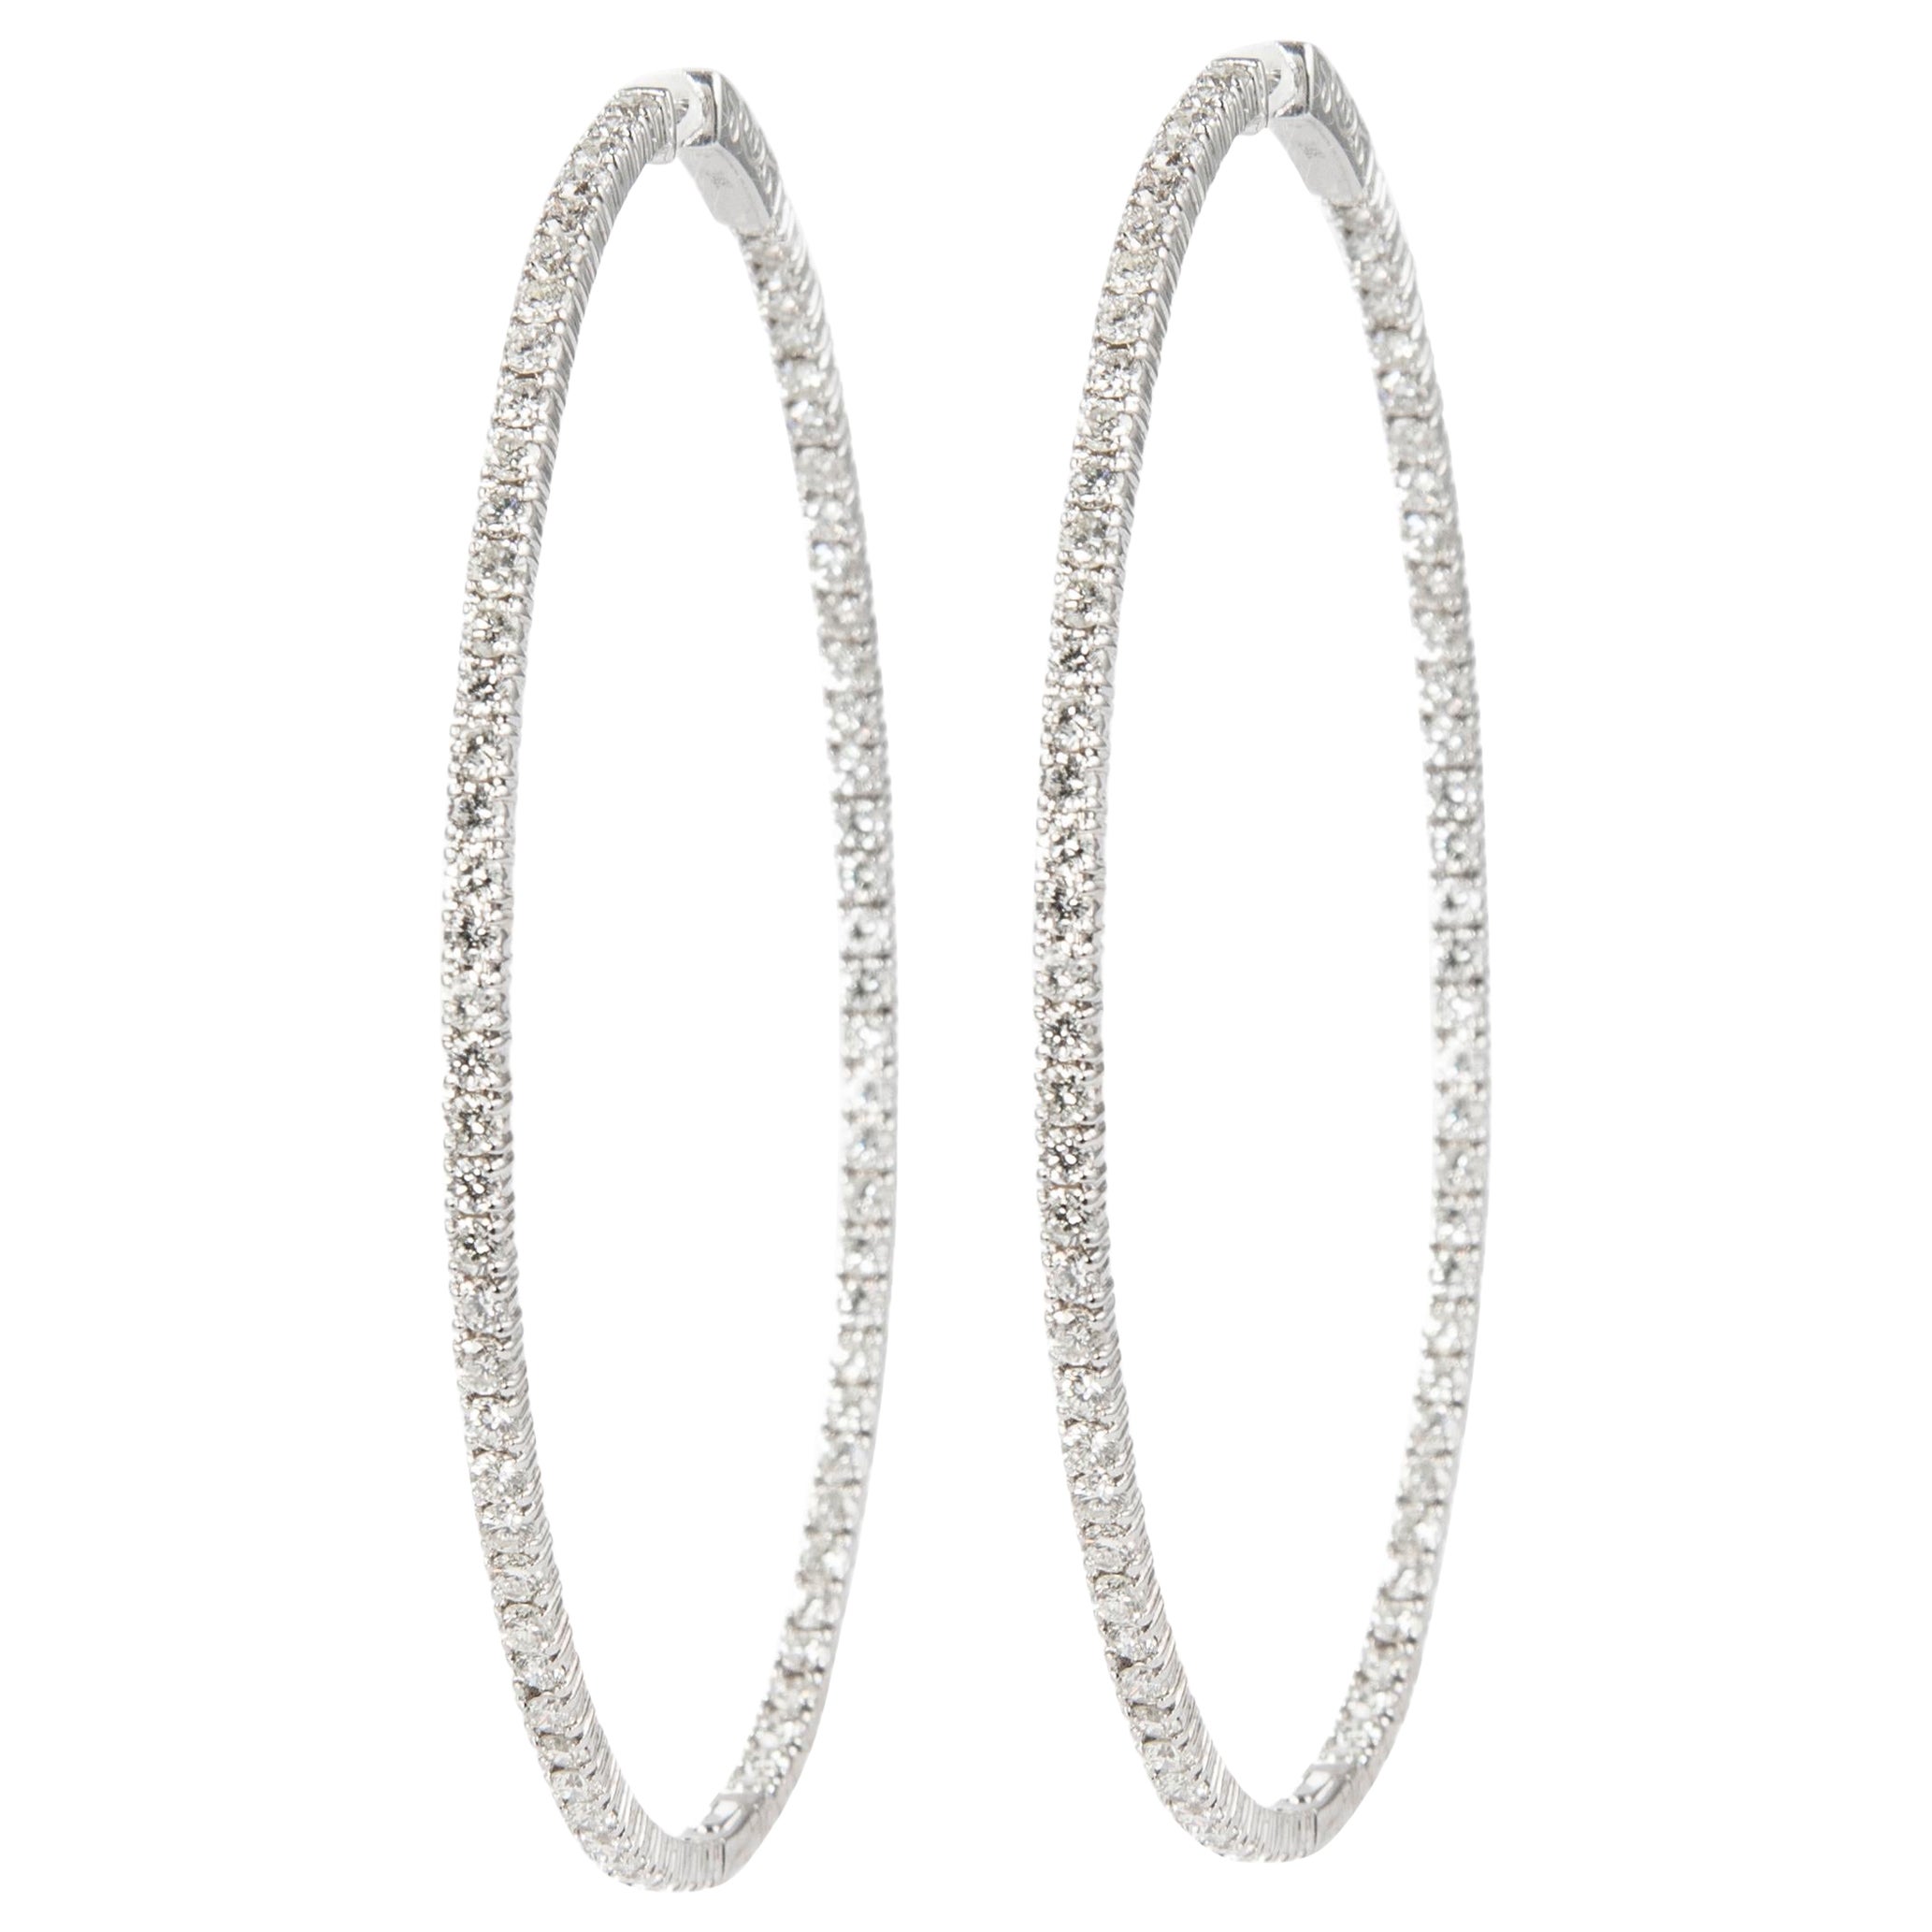 Alexander 4.86 Carat Round Diamond Oval Shaped Hoop Earrings White Gold For Sale